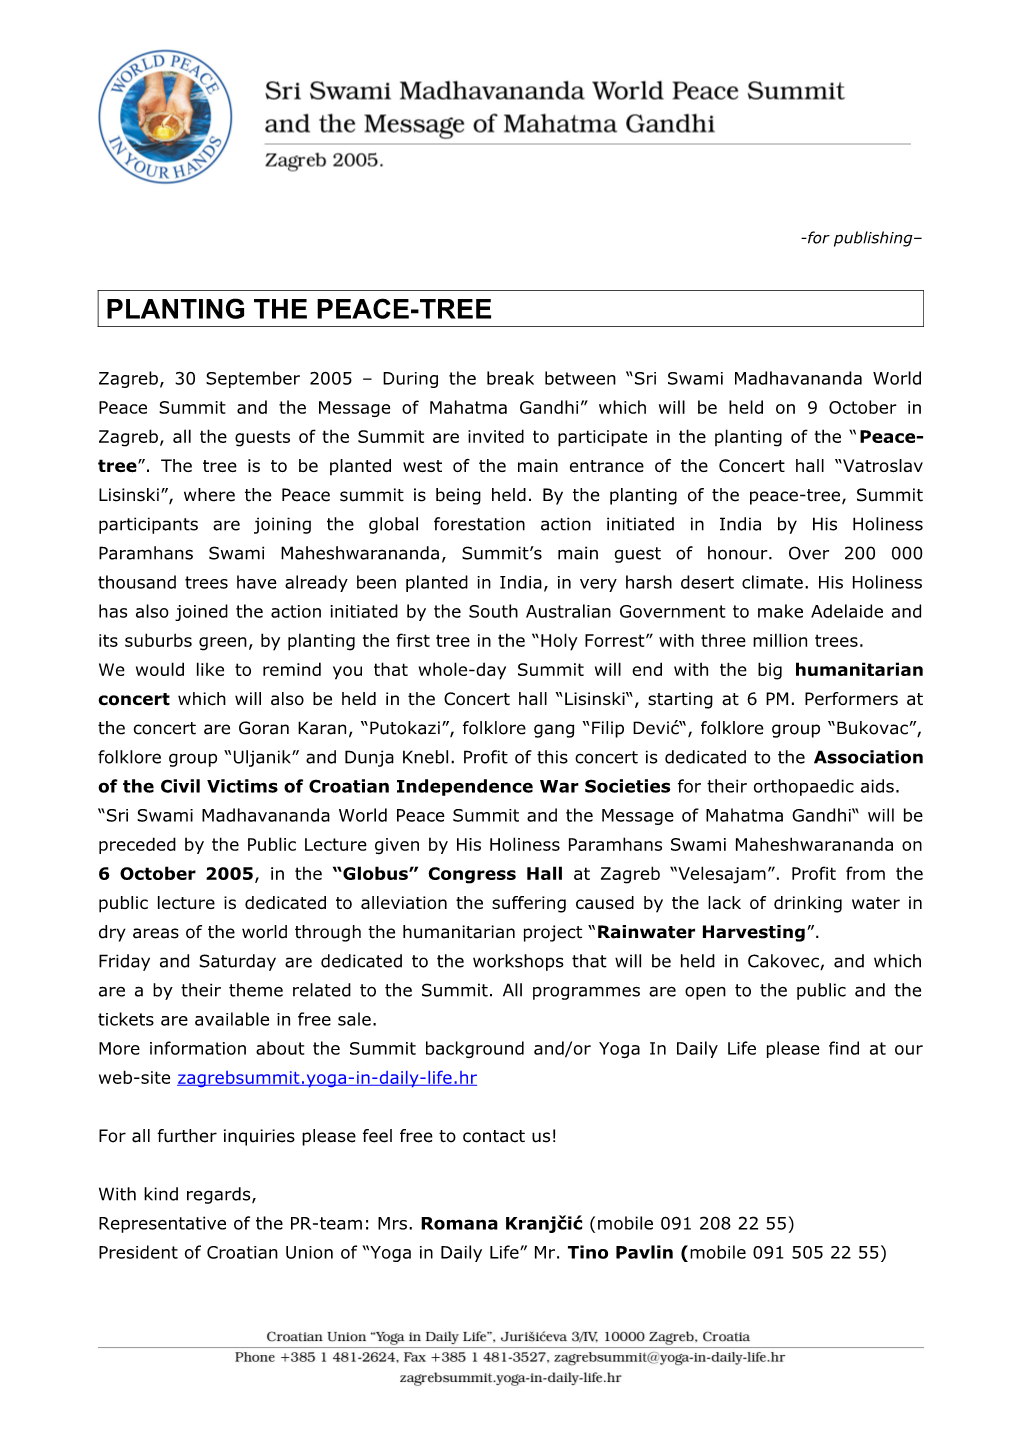 Planting the Peace-Tree